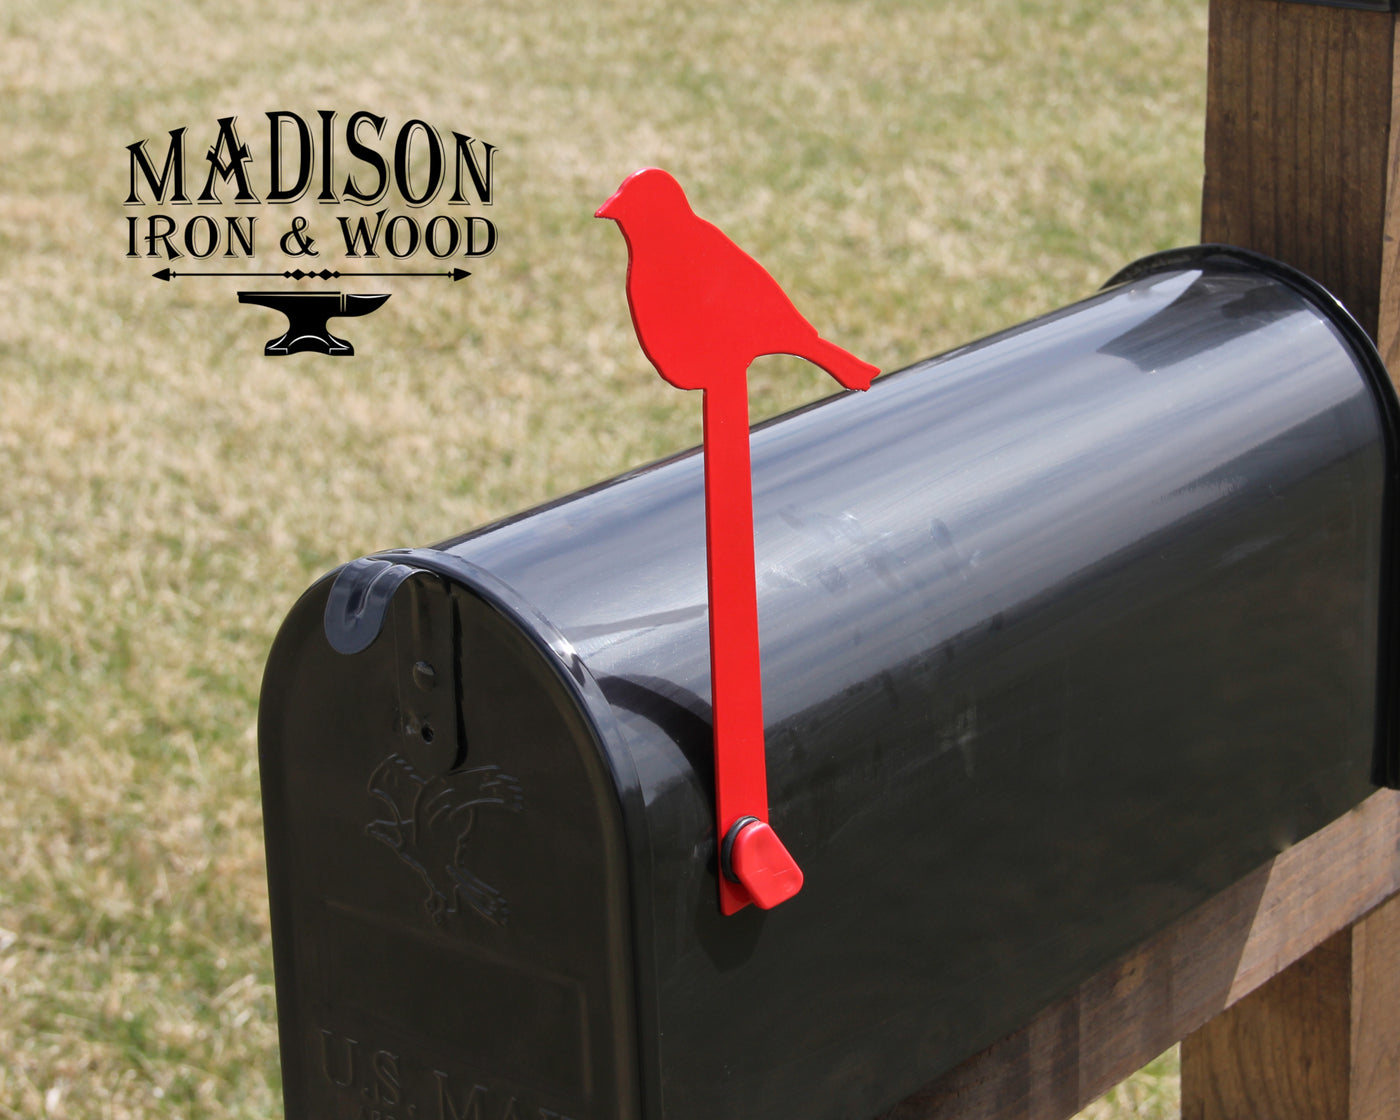 Bird Mailbox Flag - Madison Iron and Wood - Mailbox Post Decor - metal outdoor decor - Steel deocrations - american made products - veteran owned business products - fencing decorations - fencing supplies - custom wall decorations - personalized wall signs - steel - decorative post caps - steel post caps - metal post caps - brackets - structural brackets - home improvement - easter - easter decorations - easter gift - easter yard decor